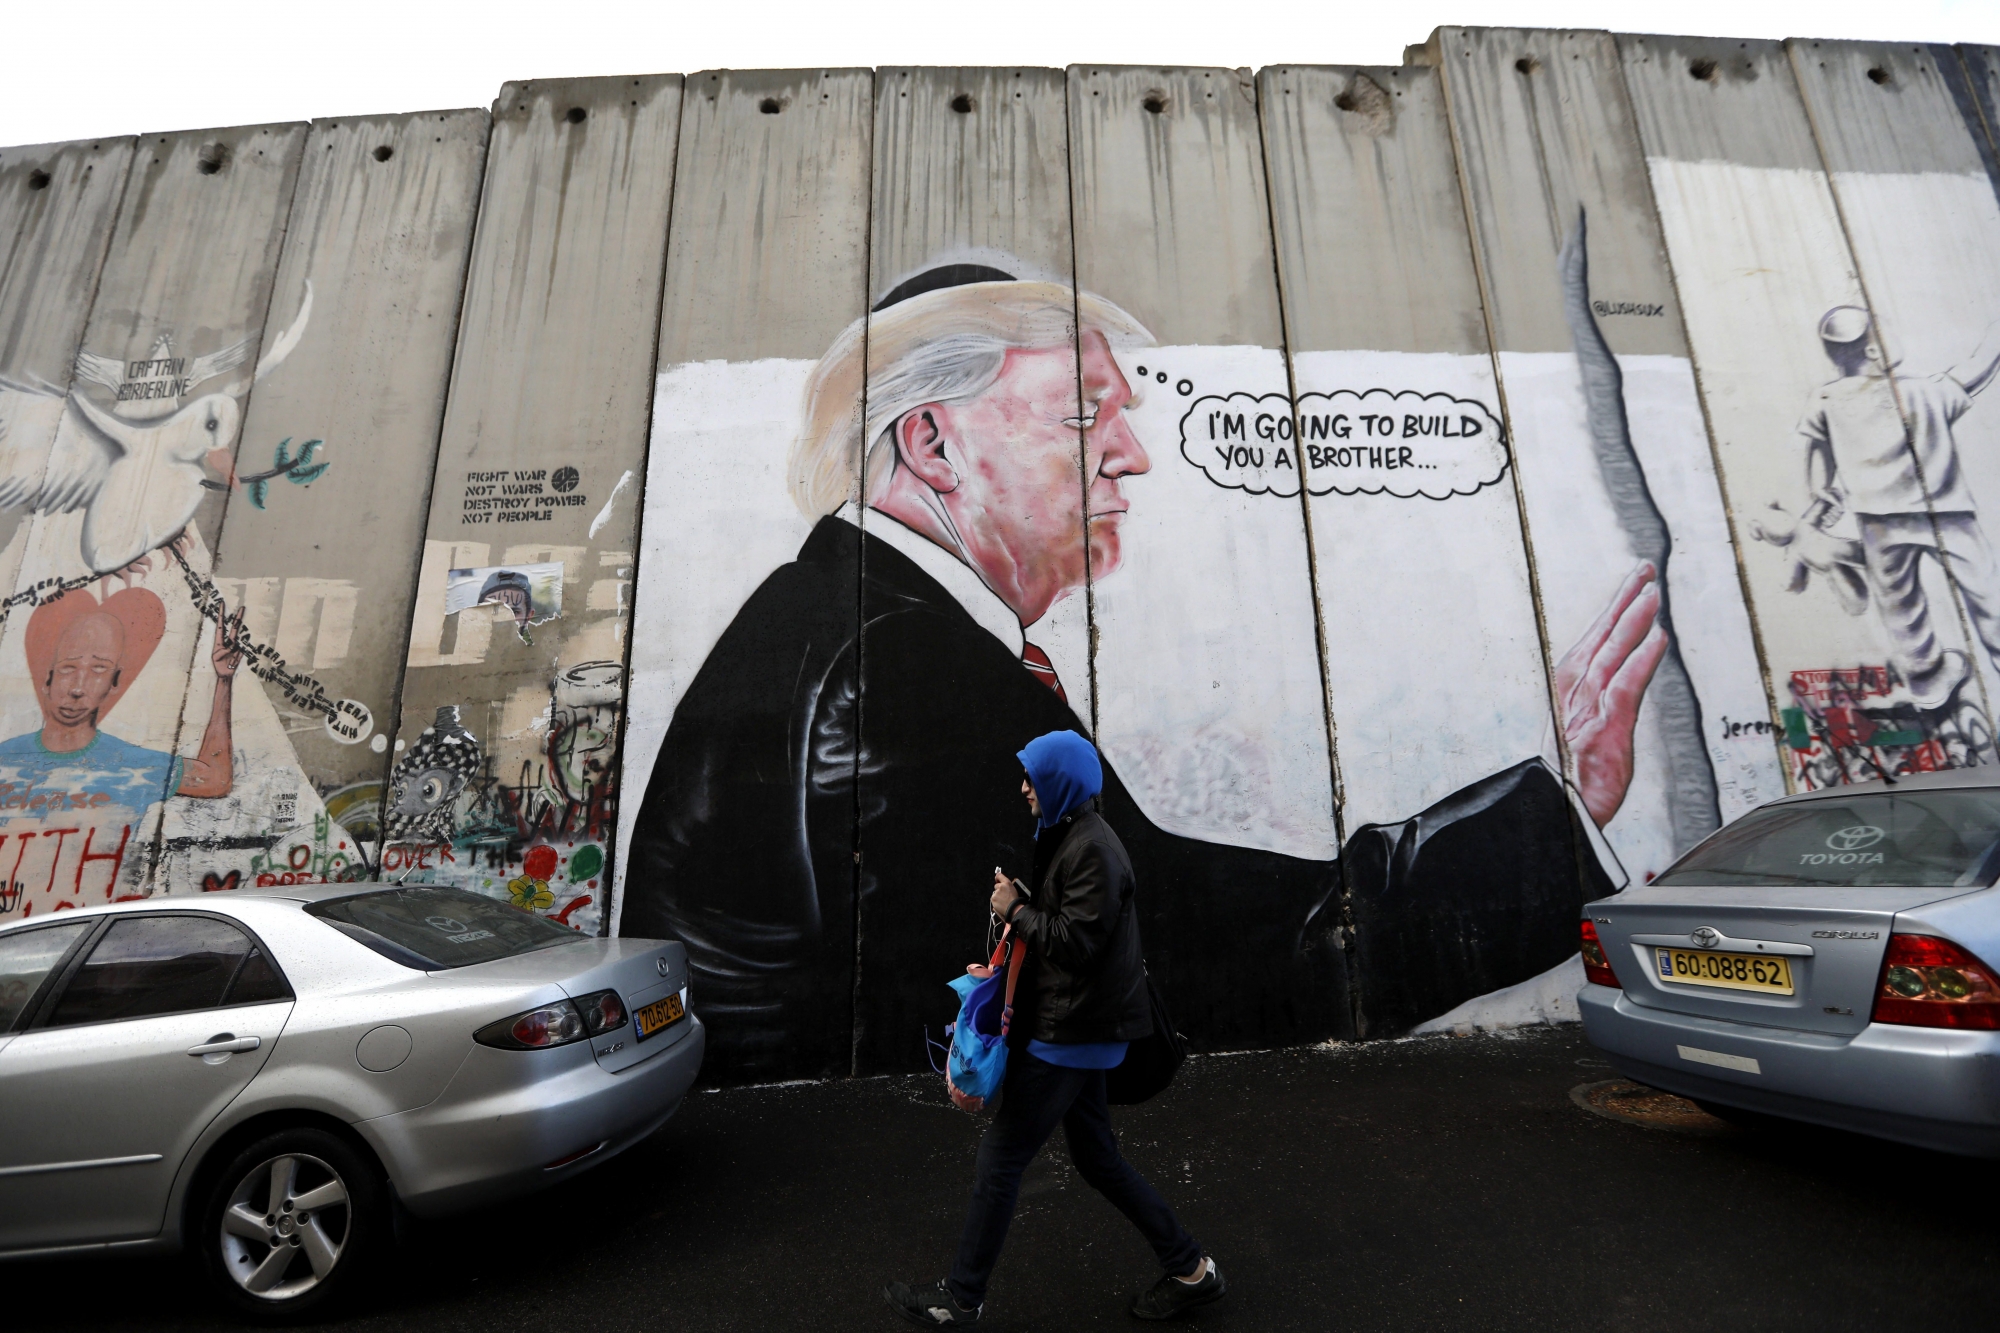 epa06371378 A woman walks in front of a sprayed graffiti of US President Donald Trump is seen on the Israeli separation wall in the West Bank city of Bethlehem, 06 December 2017. According to media reports, US President Donald J. Trump has informed Palestinian leader Mahmoud Abbas that he intends to recognize Jerusalem as the Israeli capital and will relocate the US embassy from Tel Aviv to Jerusalem.  EPA/ABED AL HASHLAMOUN MIDEAST PALESTINIANS ISRAEL USA DIPLOMACY JERUSALEM